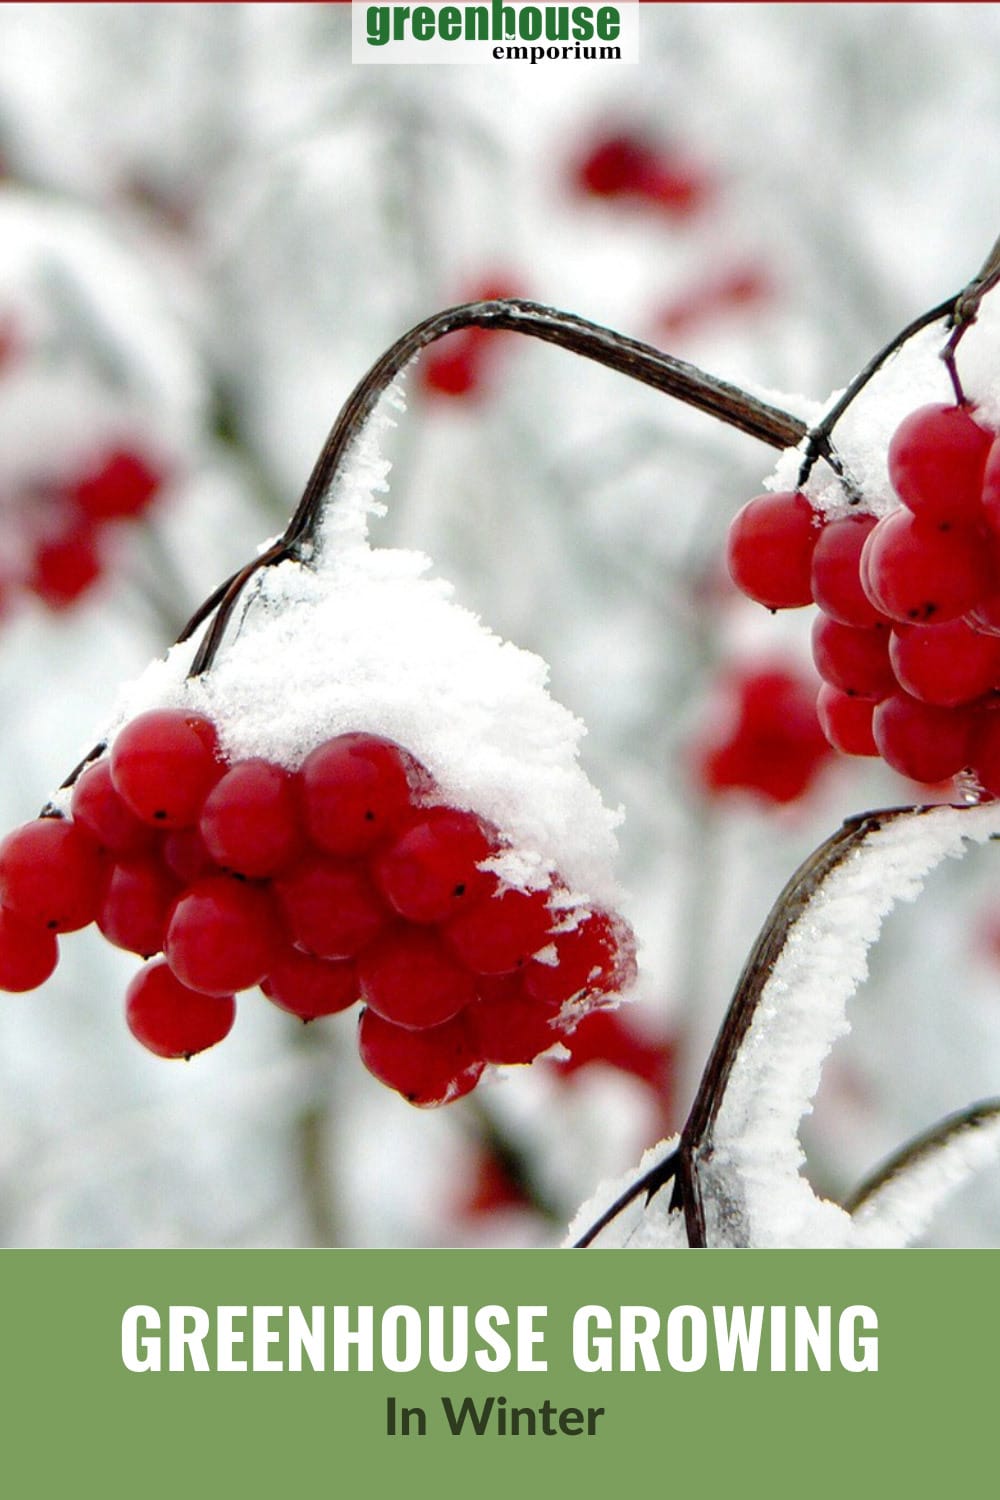 Snow covered berries on bare branches with text: Greenhouse Growing in Winter